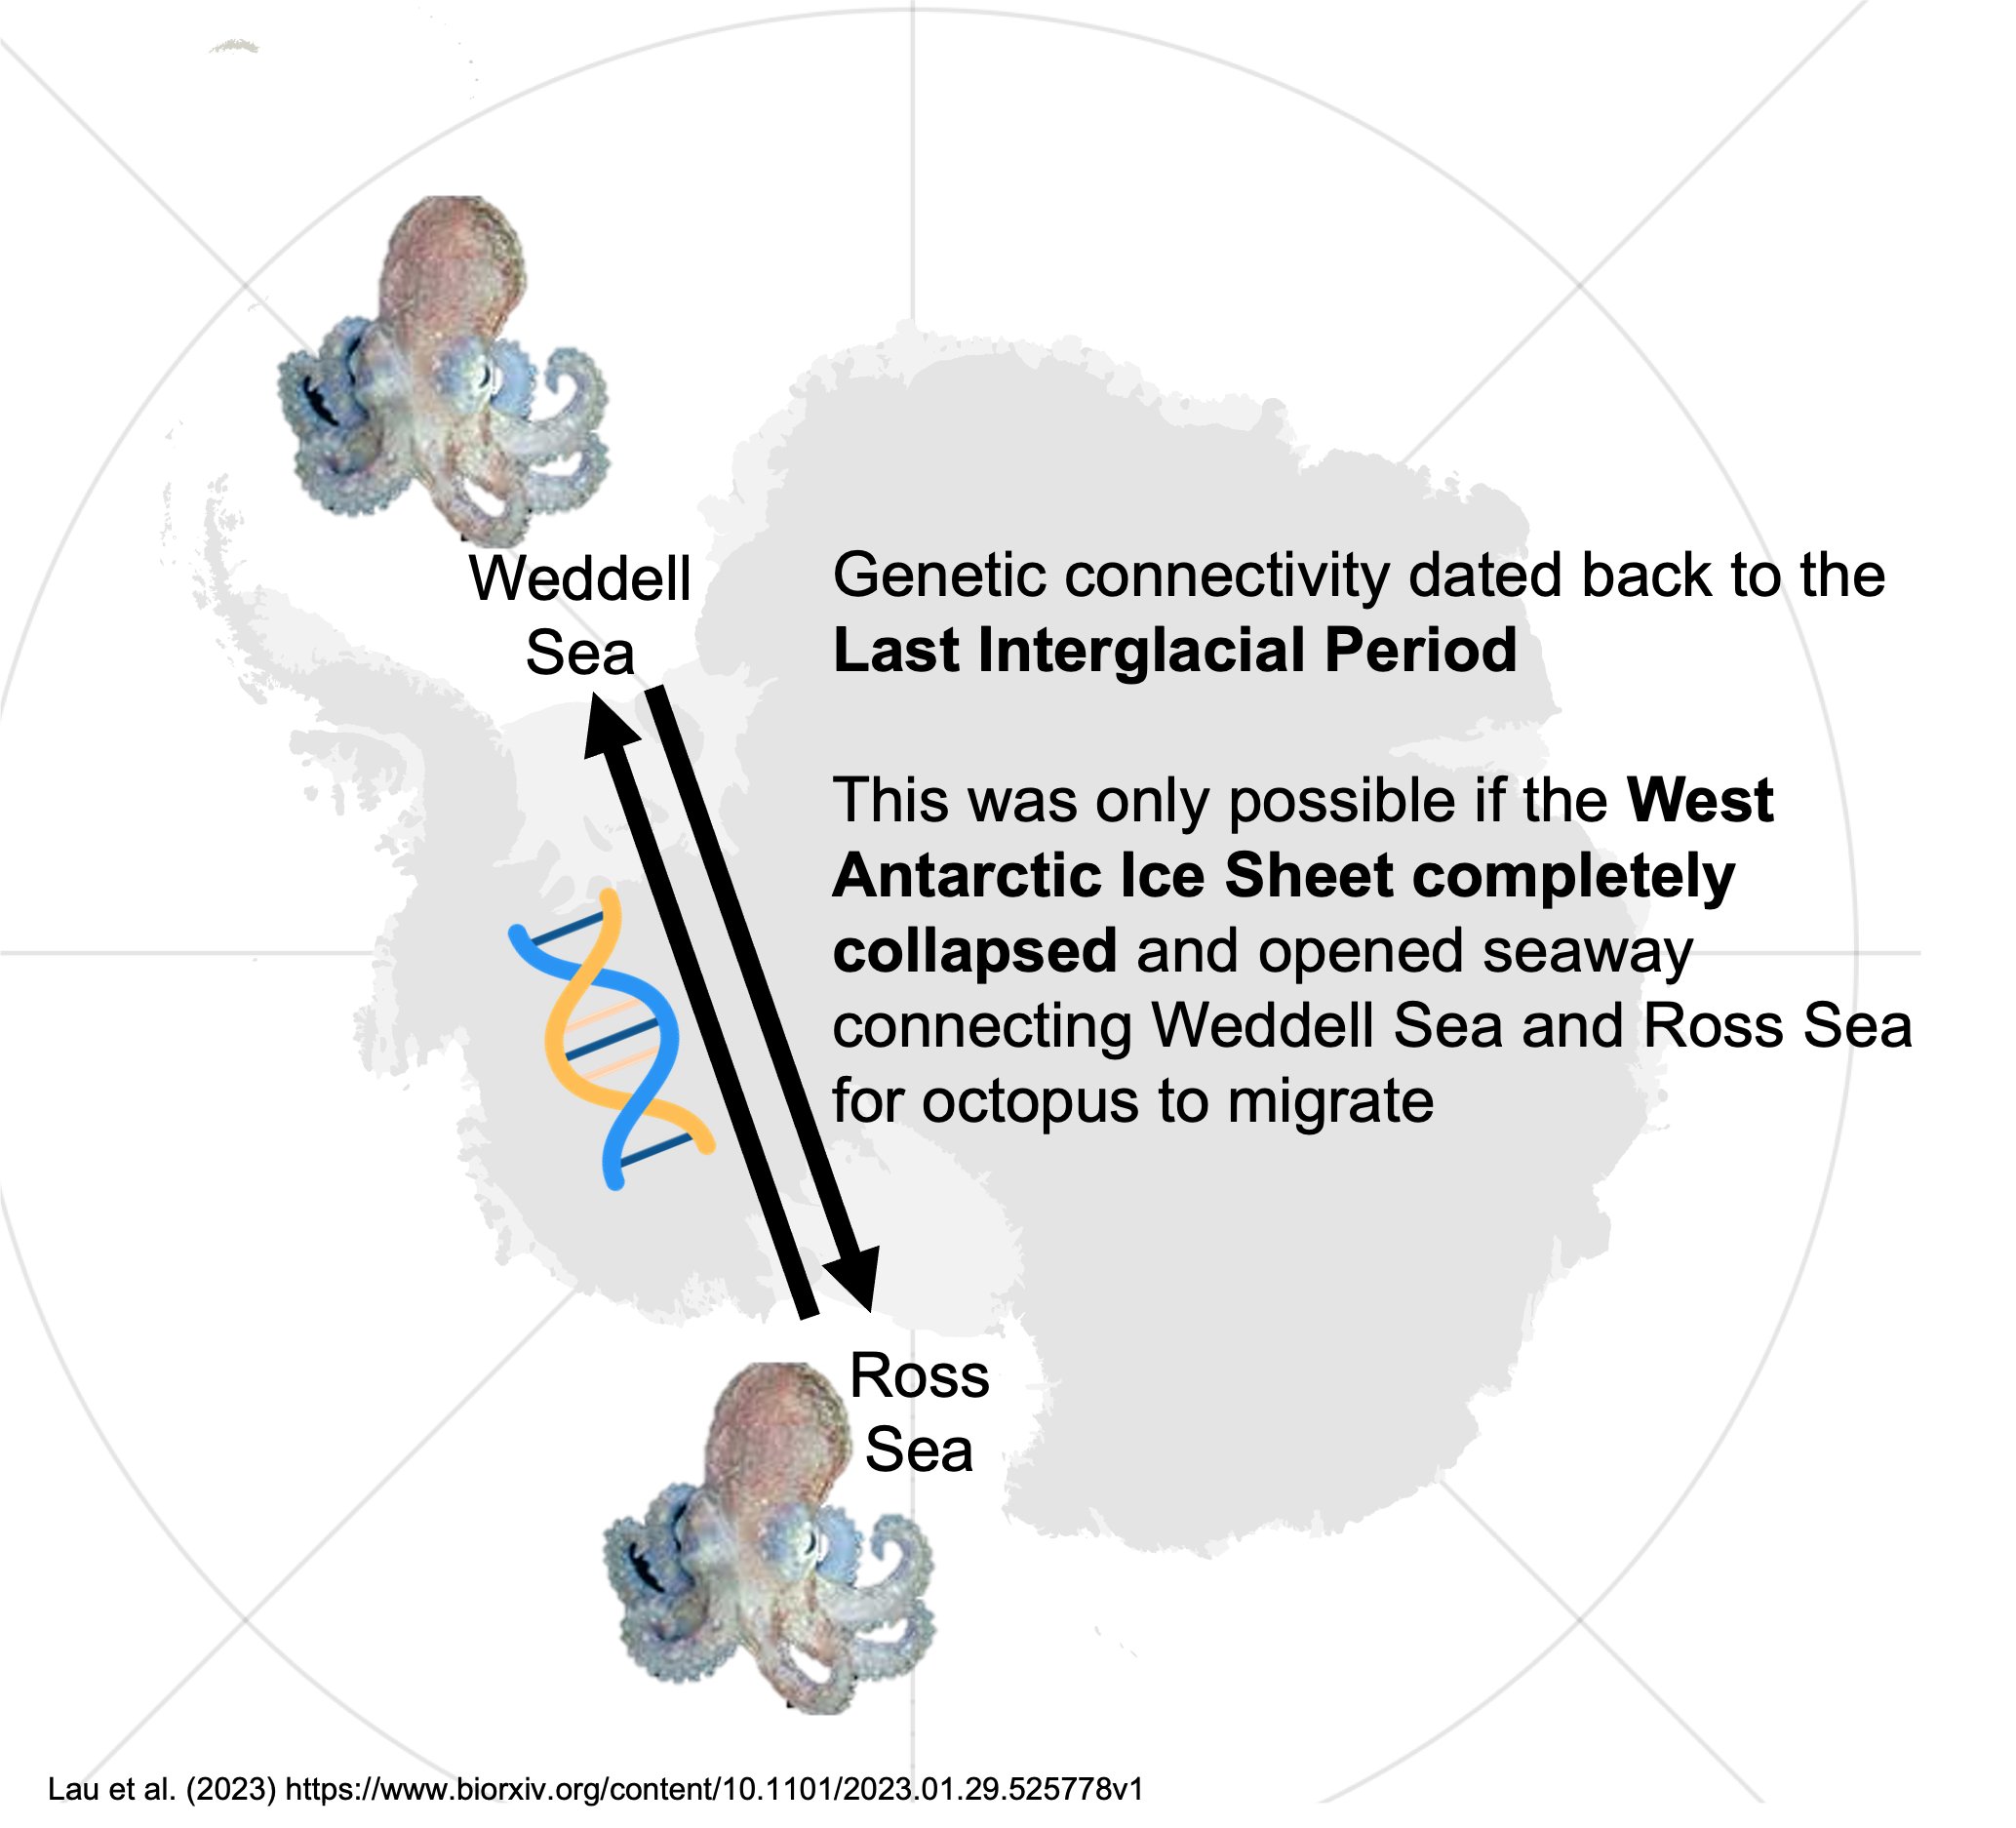 Turquet’s octopuses on either side of the West Antarctic ice sheet haven’t hooked up since the last interglacial period. They might get another shot relatively soon.